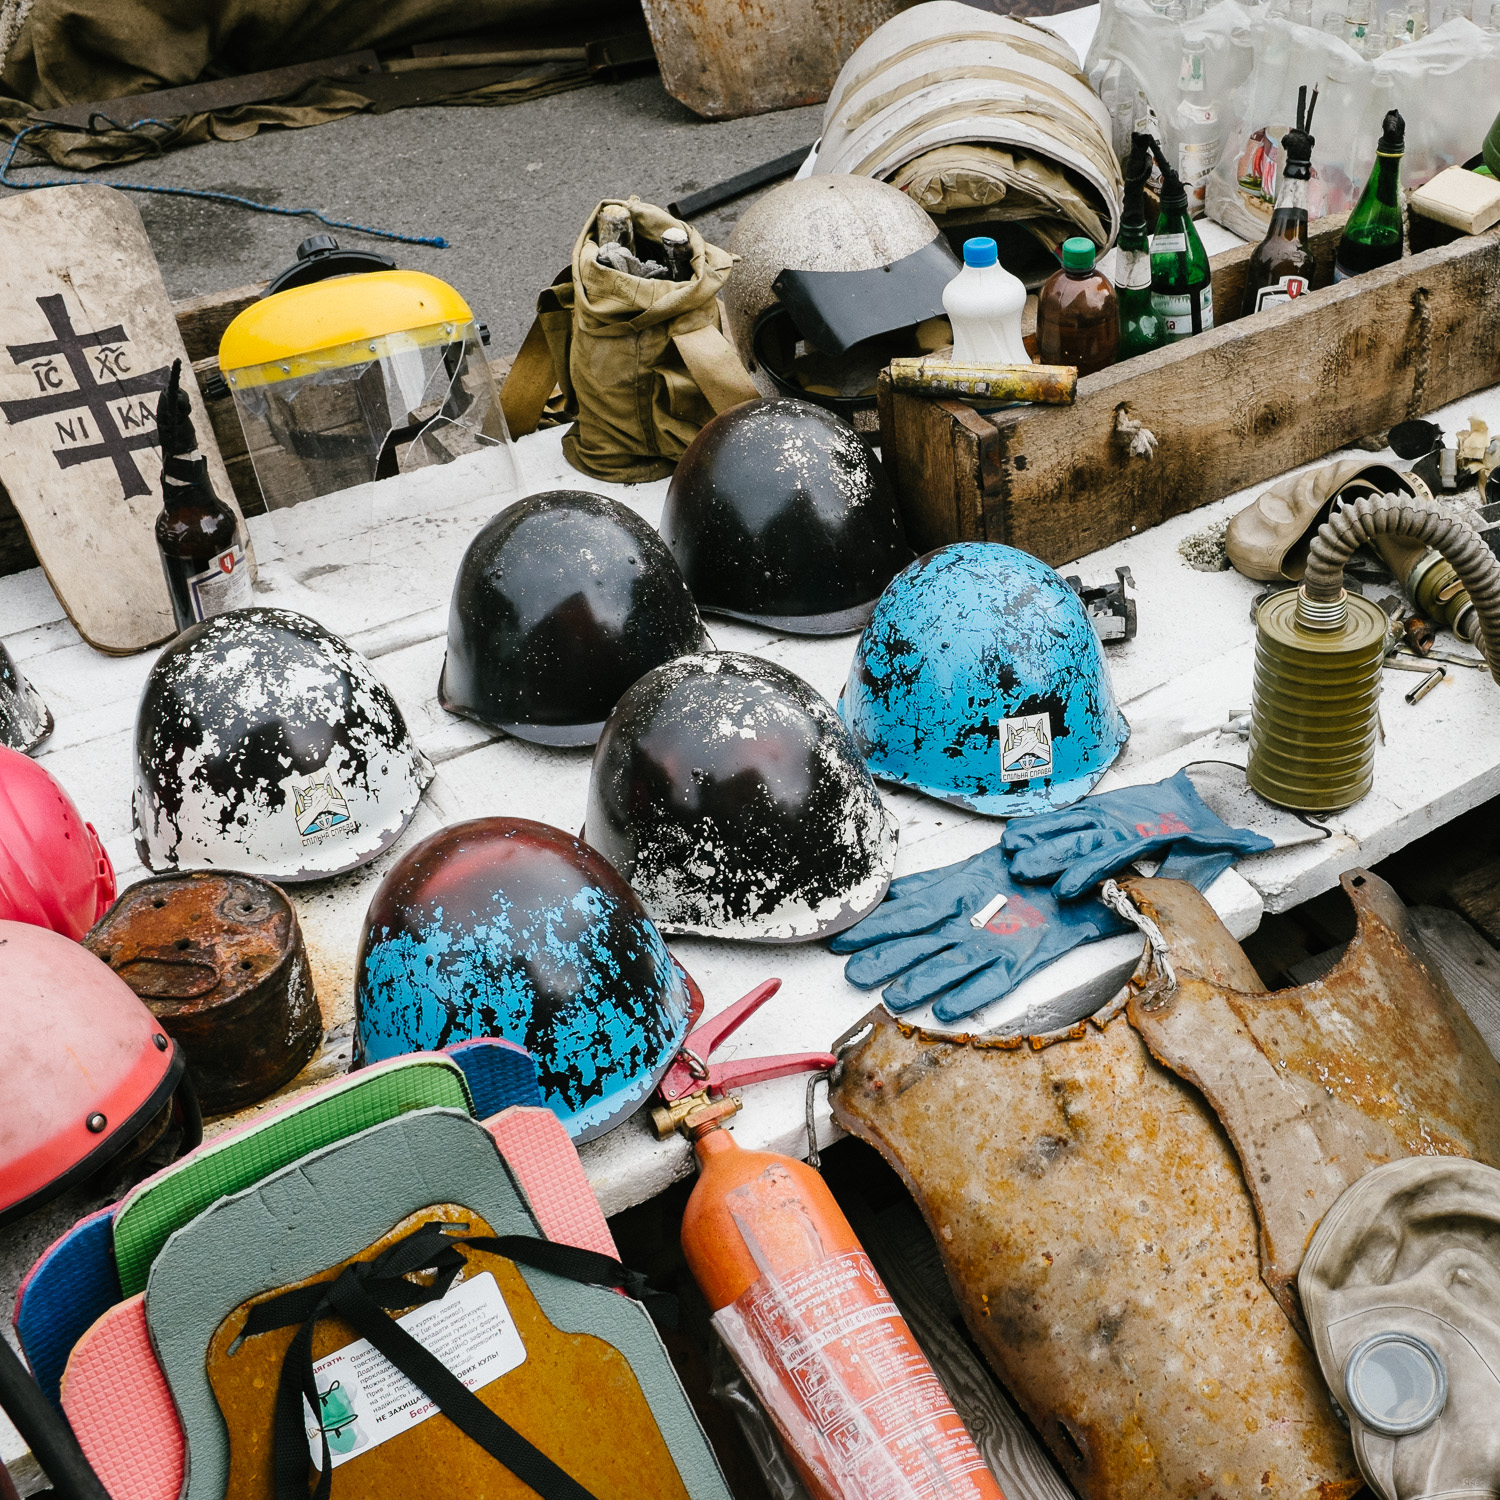  A display of helmets, shields and other items on Khreshchatyk, the main street running through Kyiv's Independence Square, and a site of protest since the beginning of the Euromaidan uprisings in November 2013. 